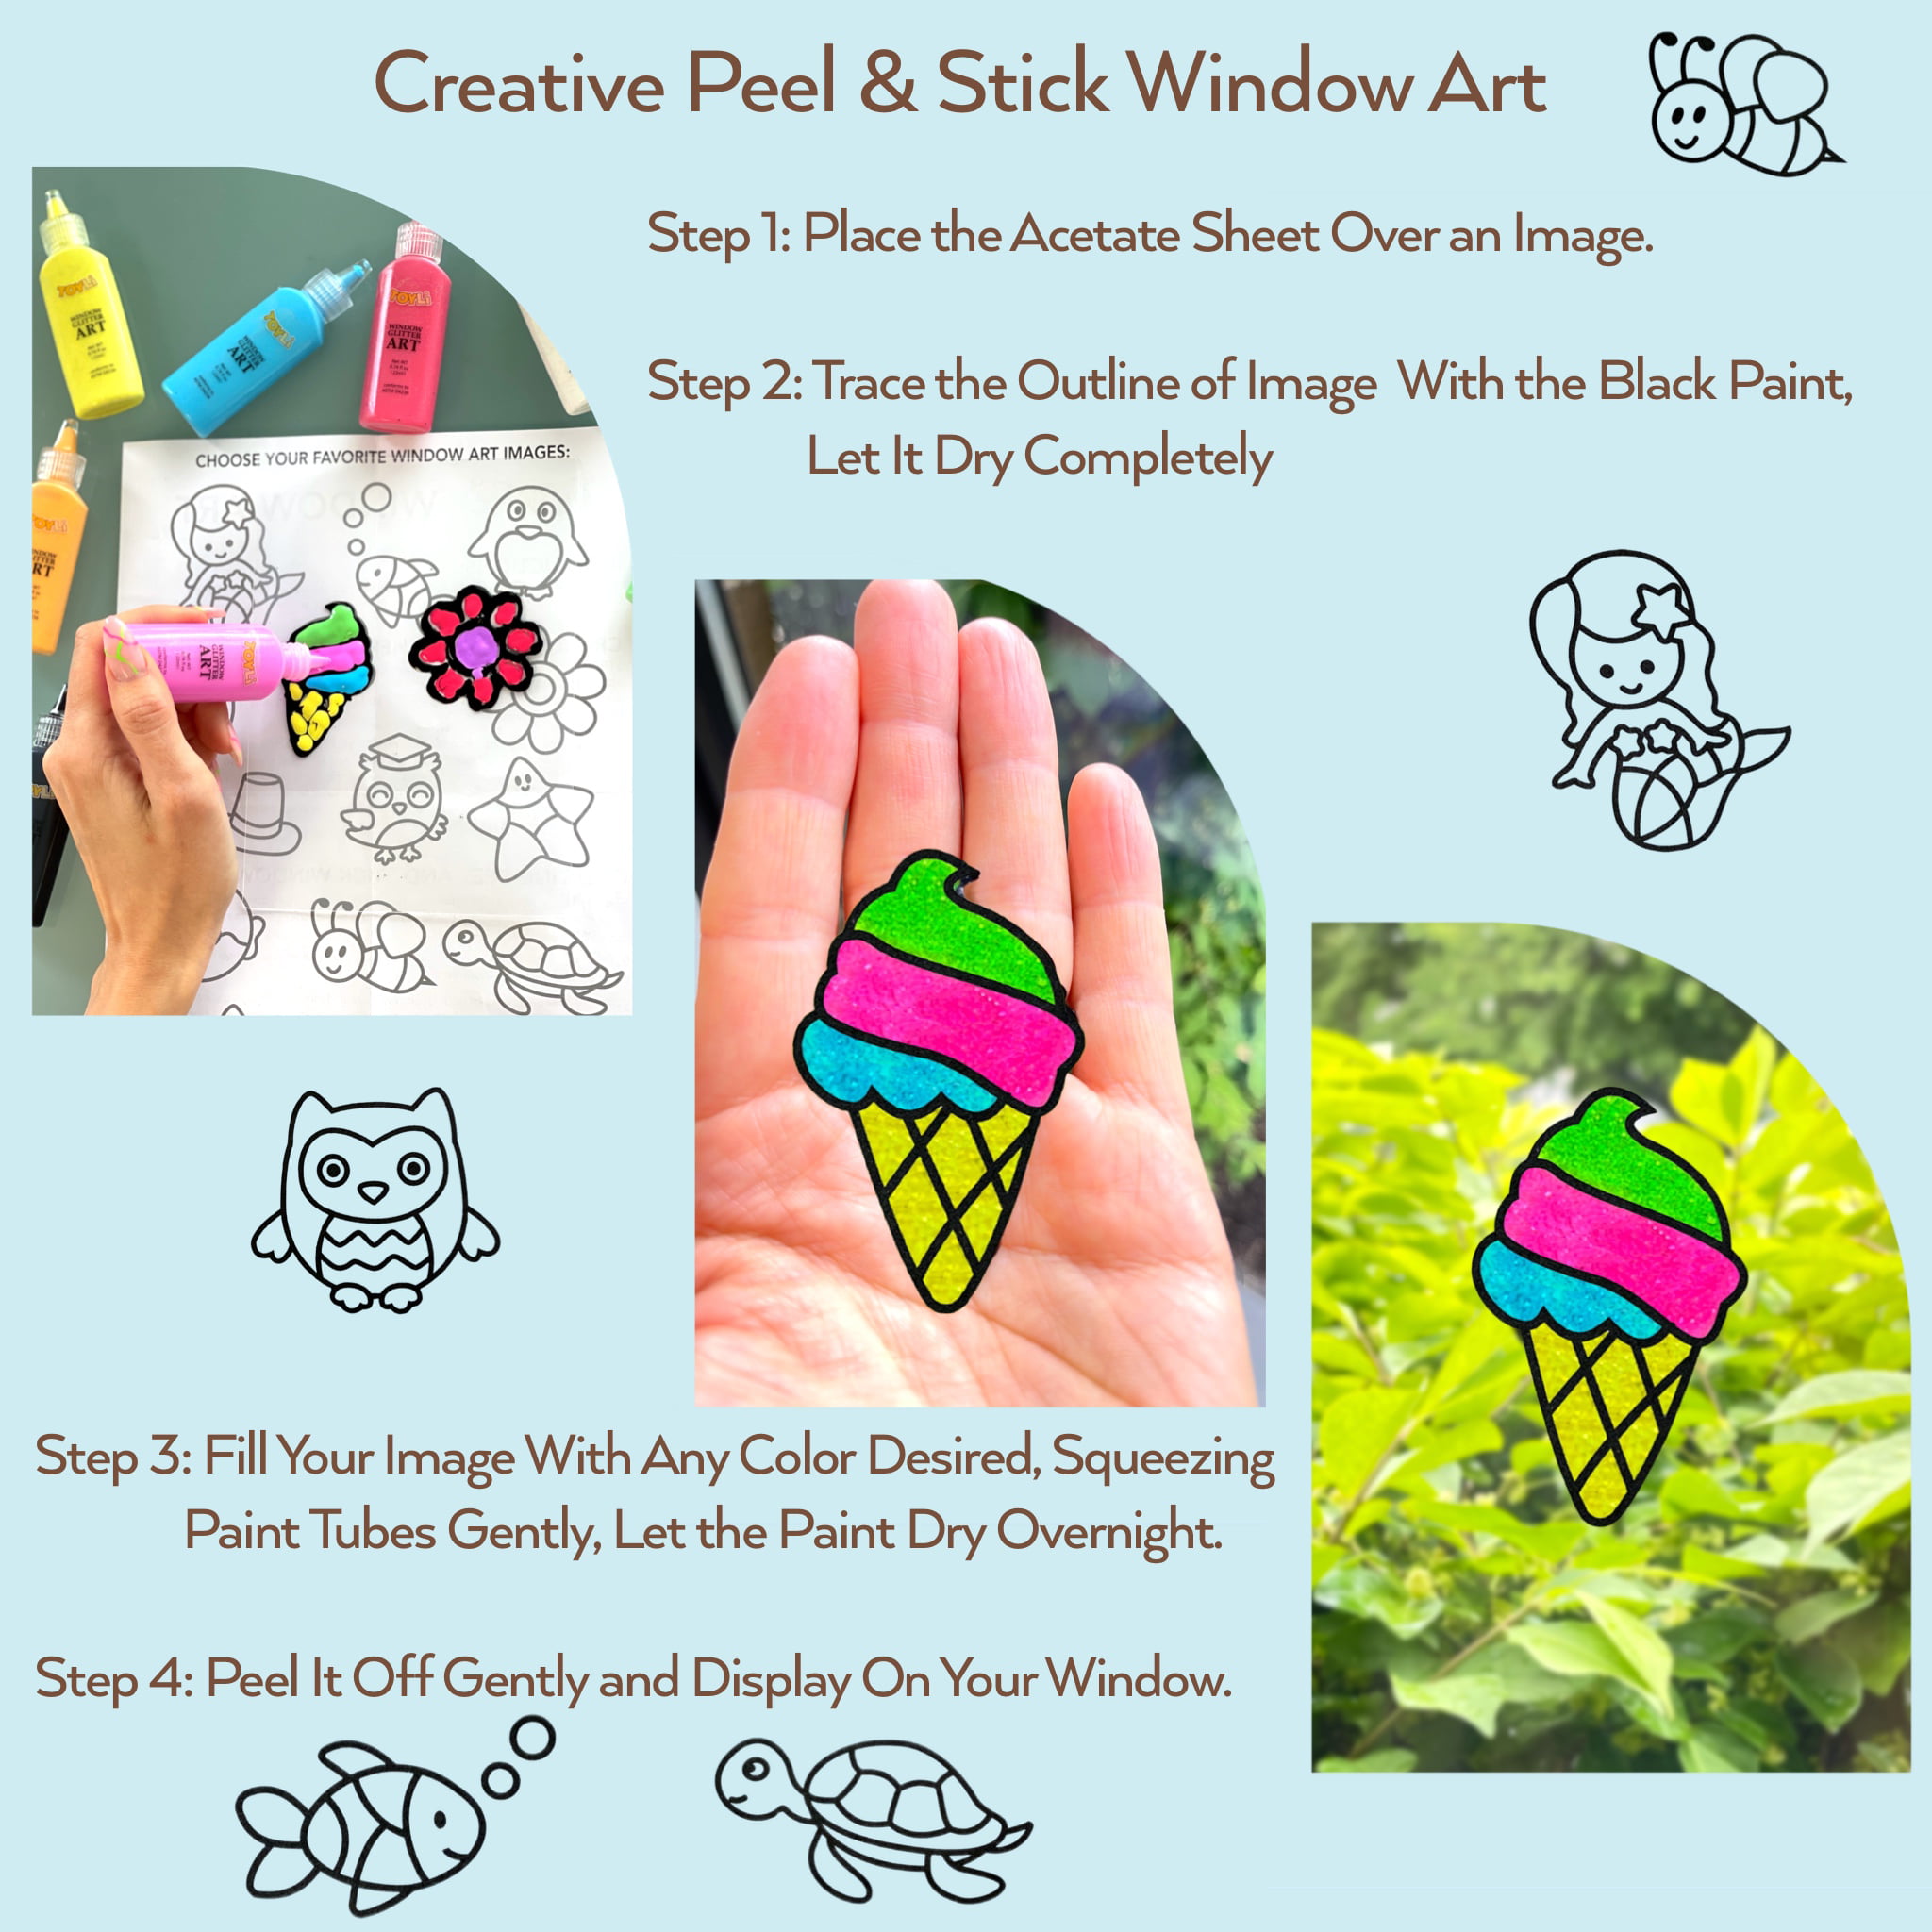  VKPI Large Suncatchers Activity, Paint Your Own Window Art Kit,  Birthday Gift Party Favors for Children, Fun Arts and Craft Kits for Kids  Ages 4-8 8-12 : Toys & Games